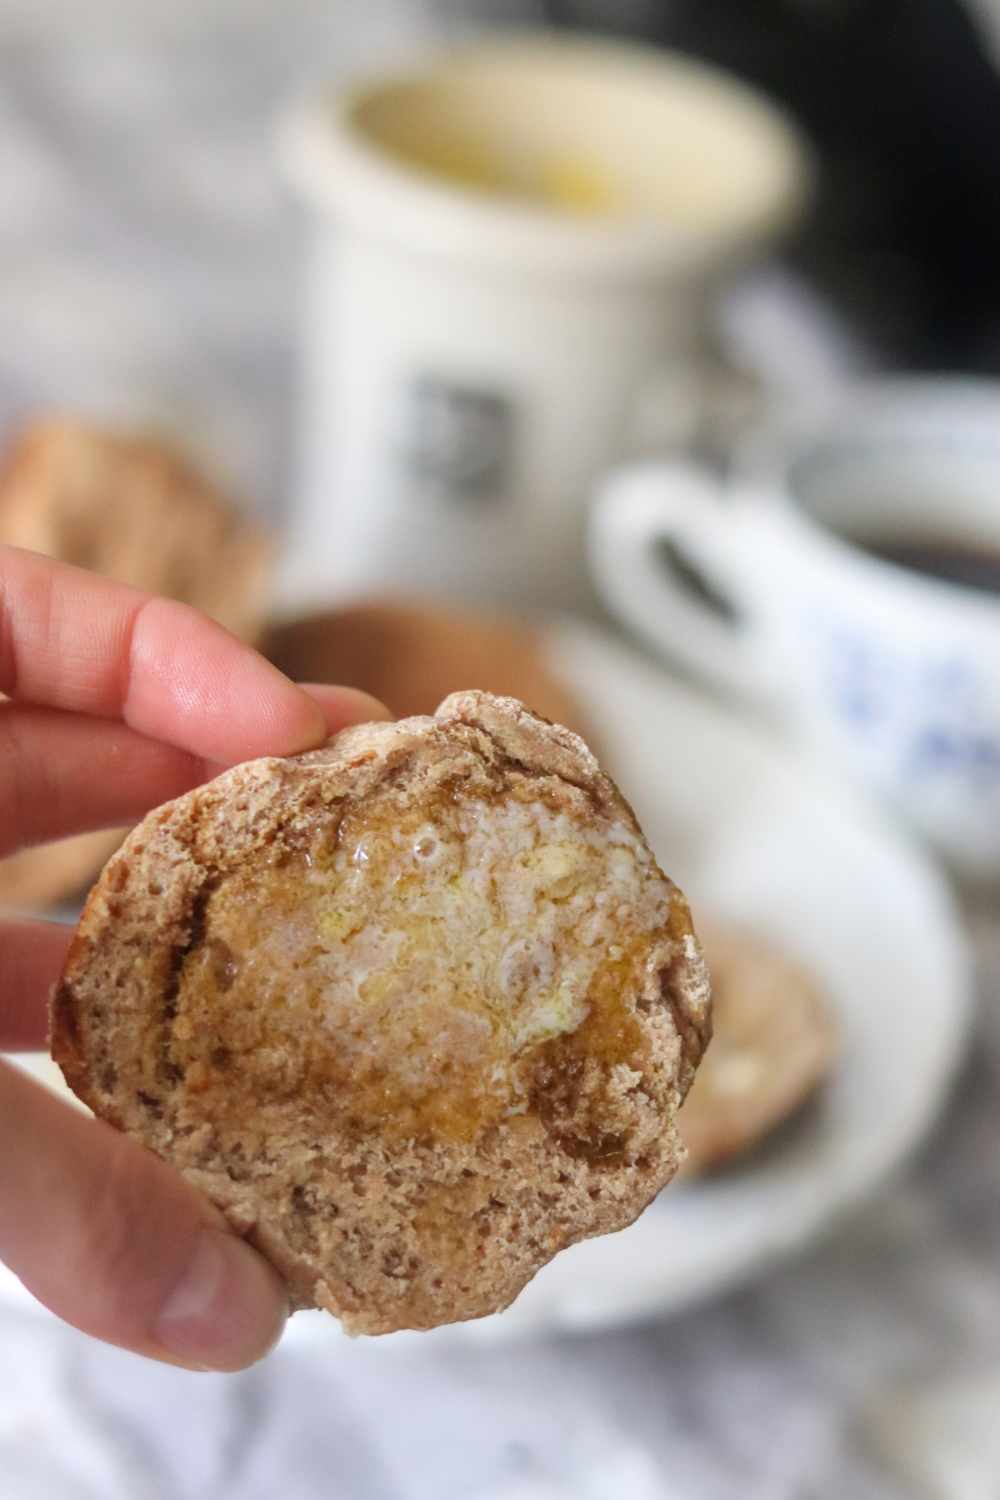 3-easy-whole-wheat-sourdough-English-muffins-discard-long-fermented-quick-recipe-honey-butter-healthy-breakfast-ideas